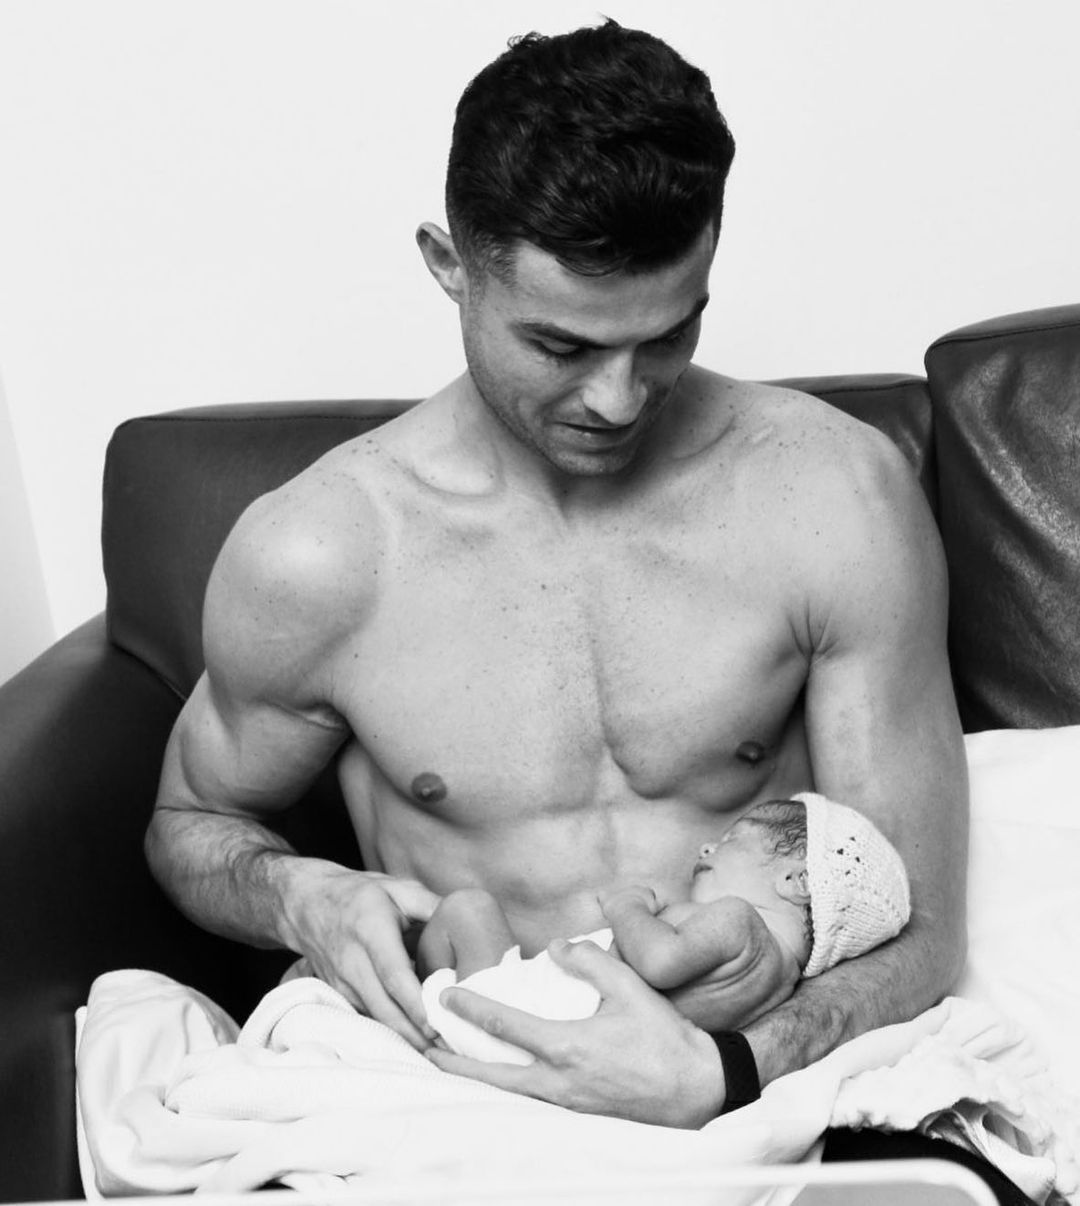 Cristiano Ronaldo shares first photo of late son.